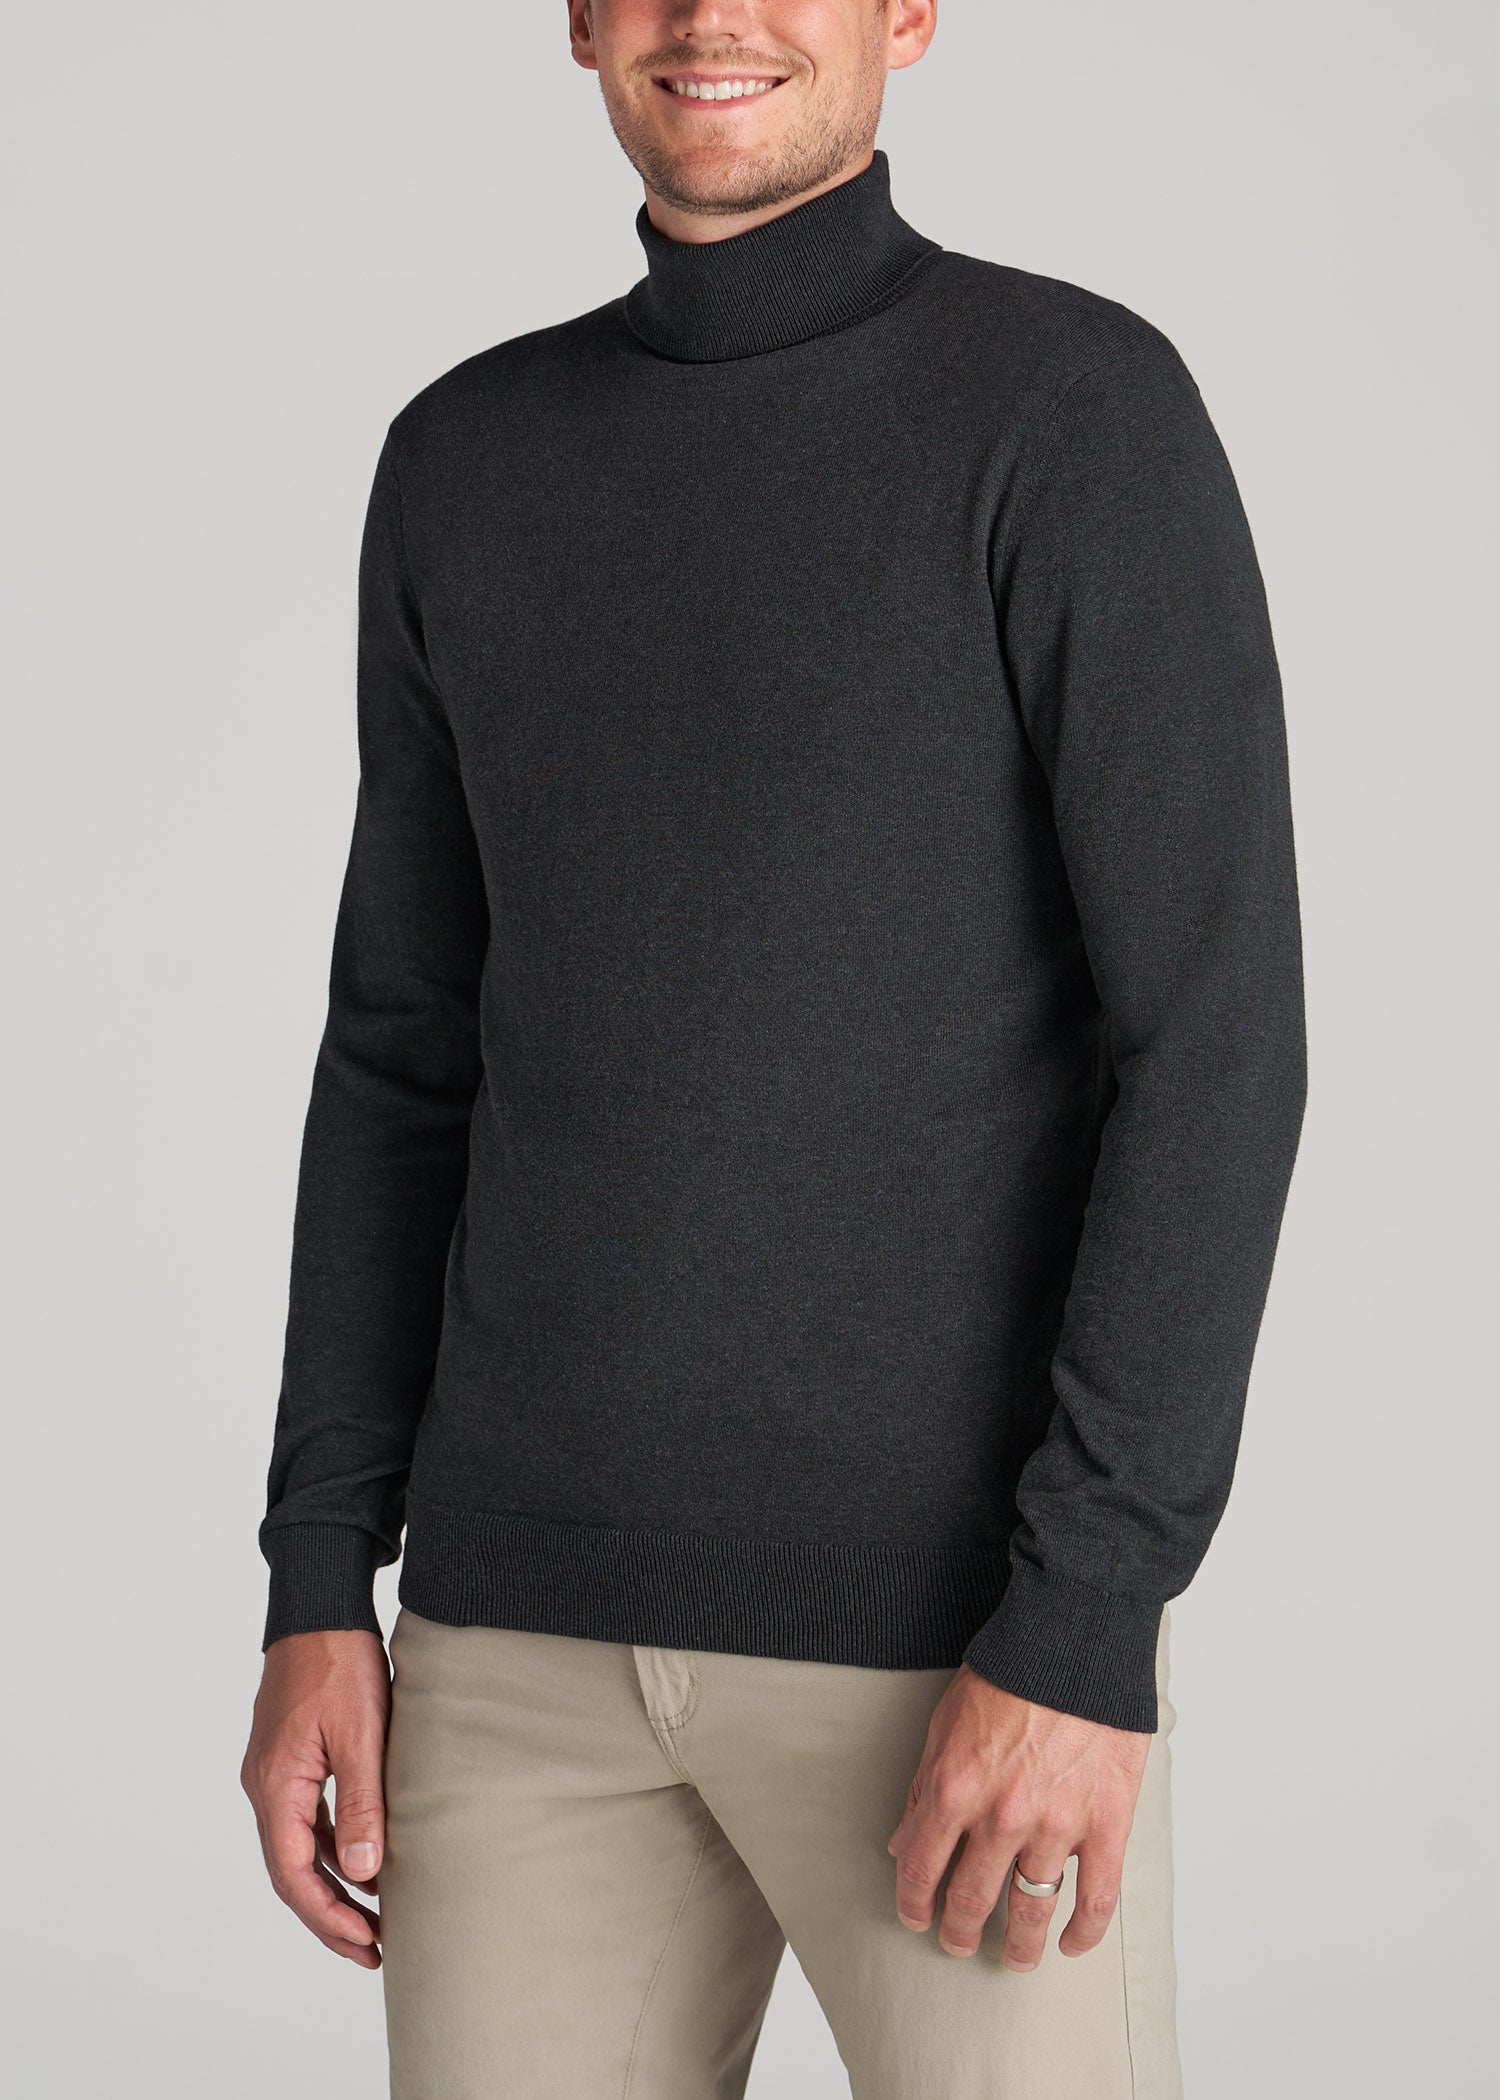         American-Tall-Men-Turtleneck-Charcoal-Mix-side